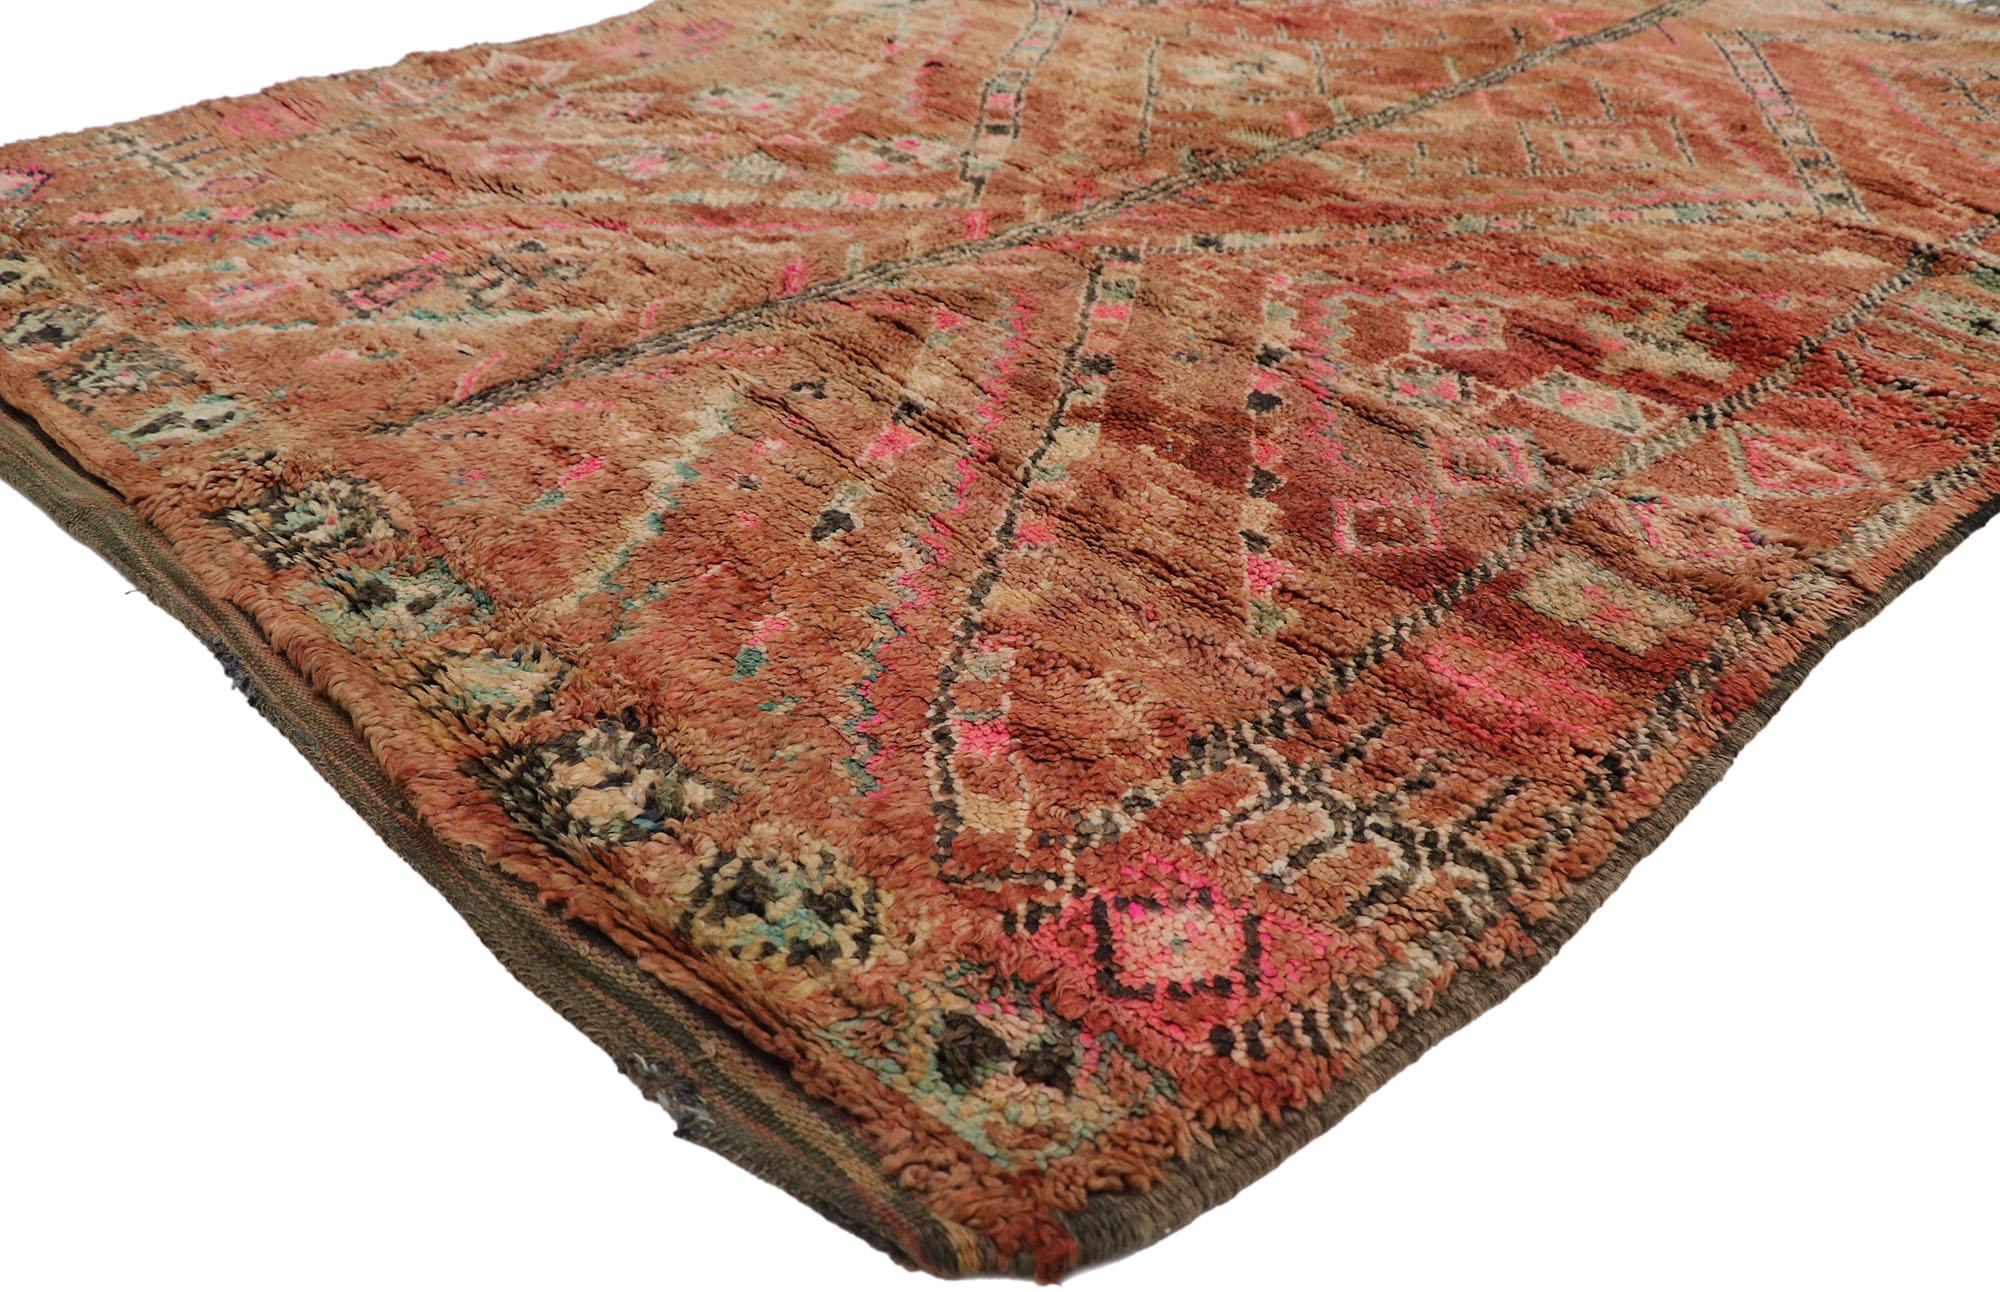 21236 Vintage Boujad Moroccan Rug, 05'00 x 07'00. Boujad rugs, born in Morocco's Boujad region, are more than mere floor coverings; they are exquisite handwoven masterpieces that capture the vibrant artistic heritage of Berber tribes, particularly